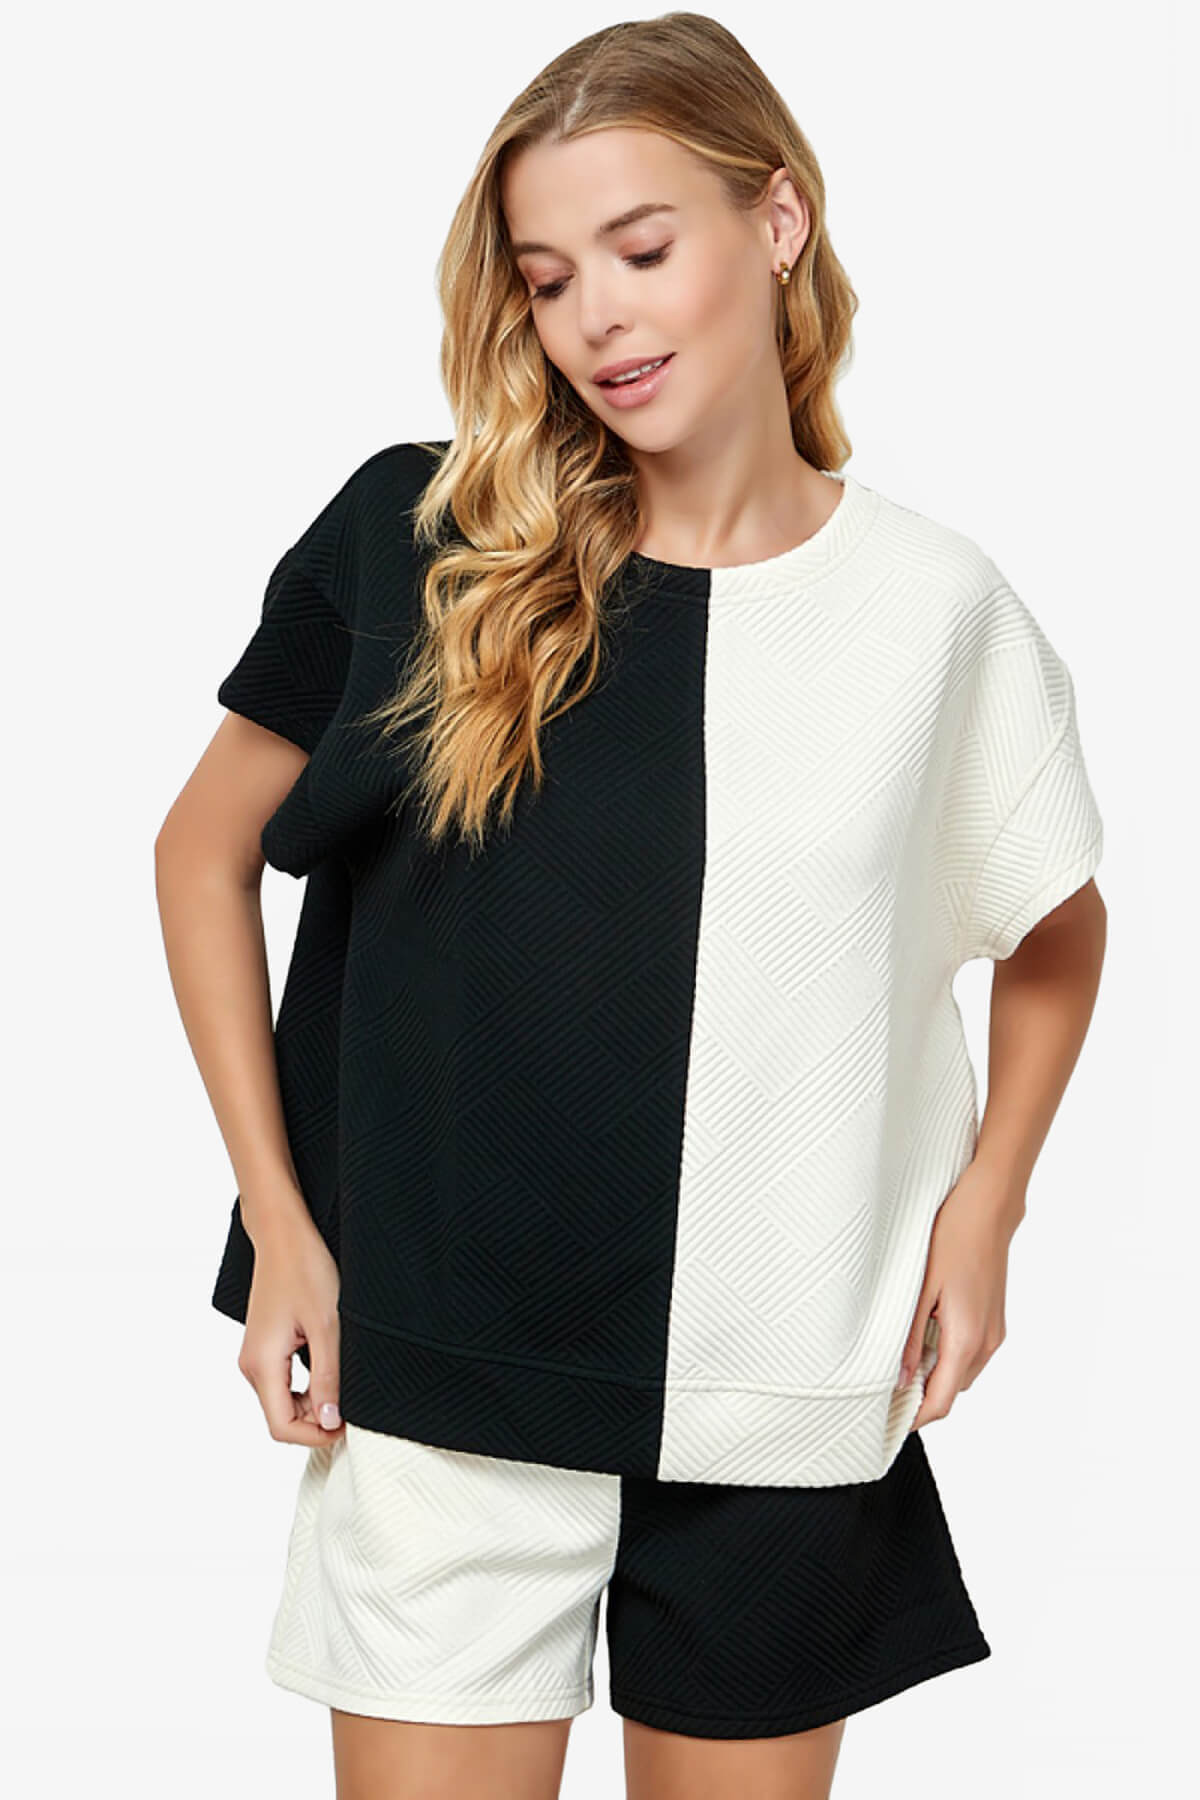 Lassy Textured Colorblock Short Sleeve Top BLACK AND WHITE_1